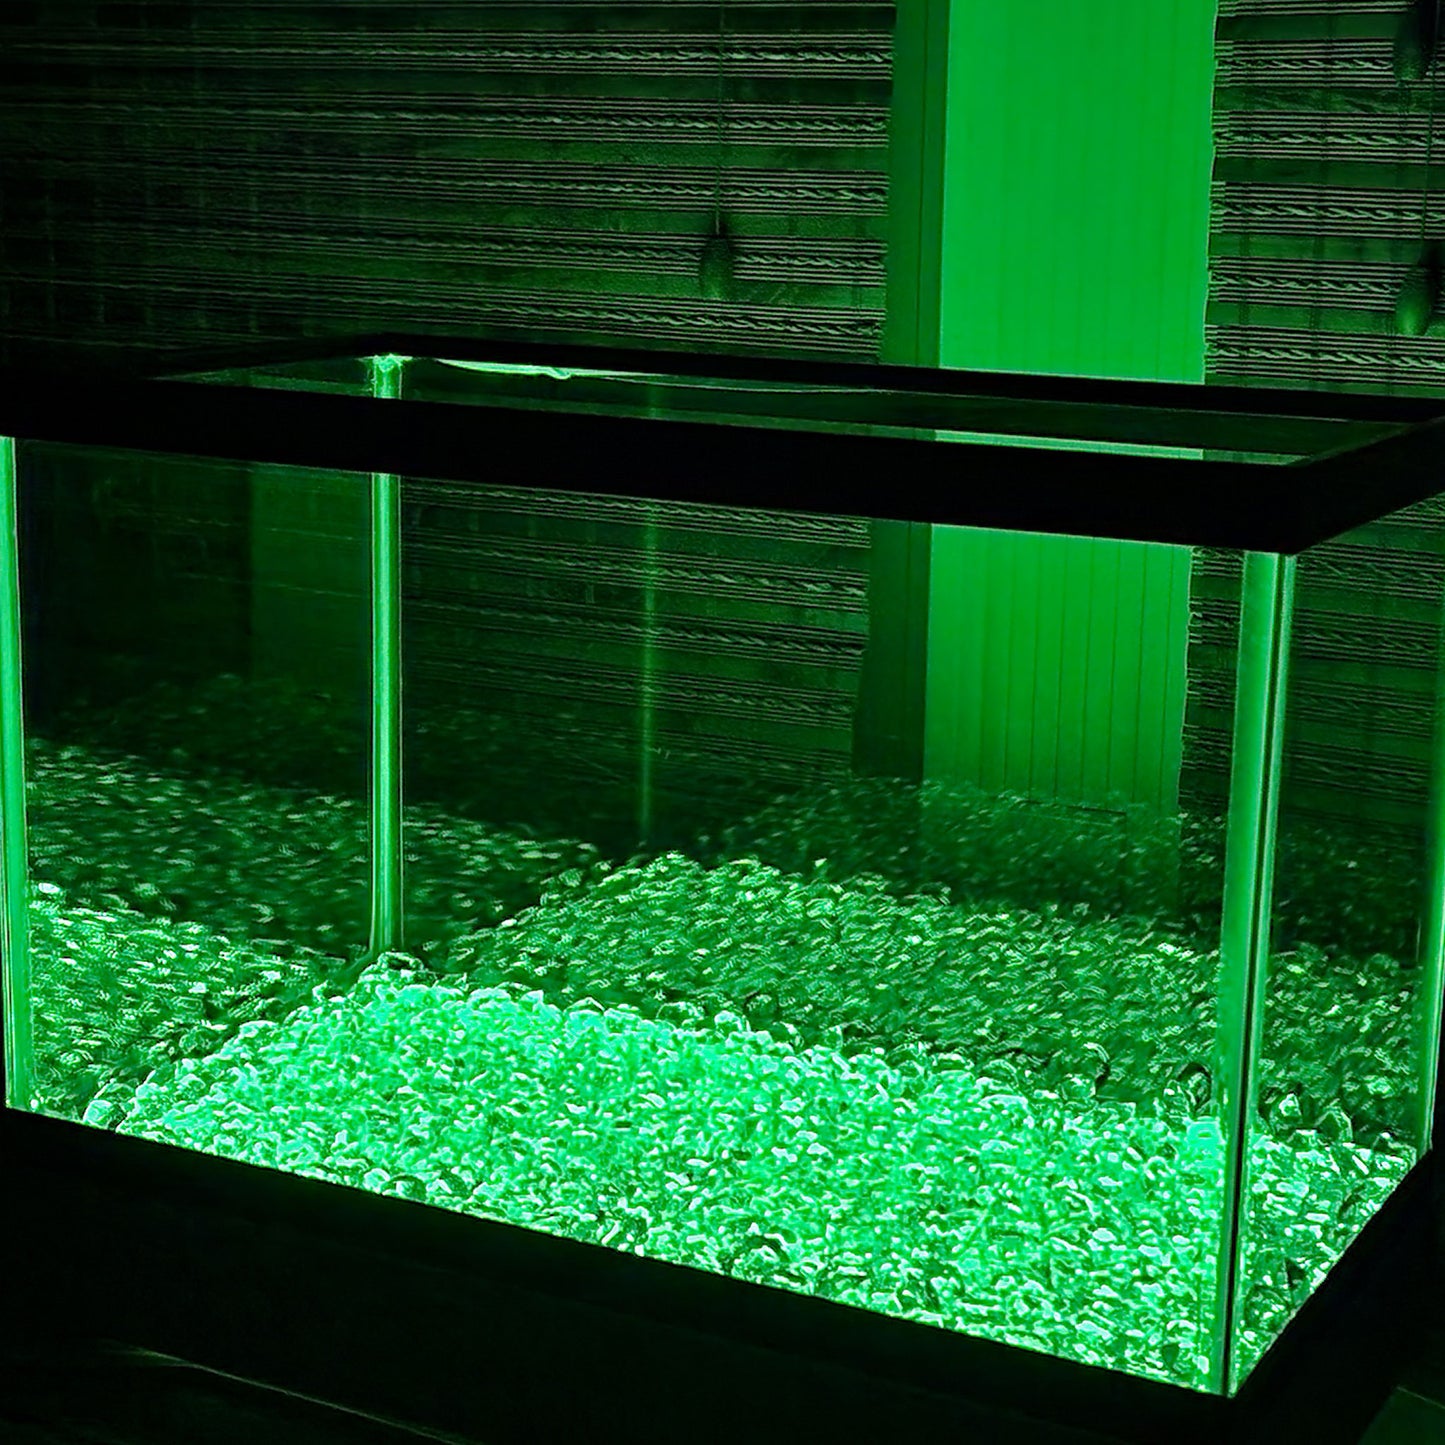 LED lights in green at night.